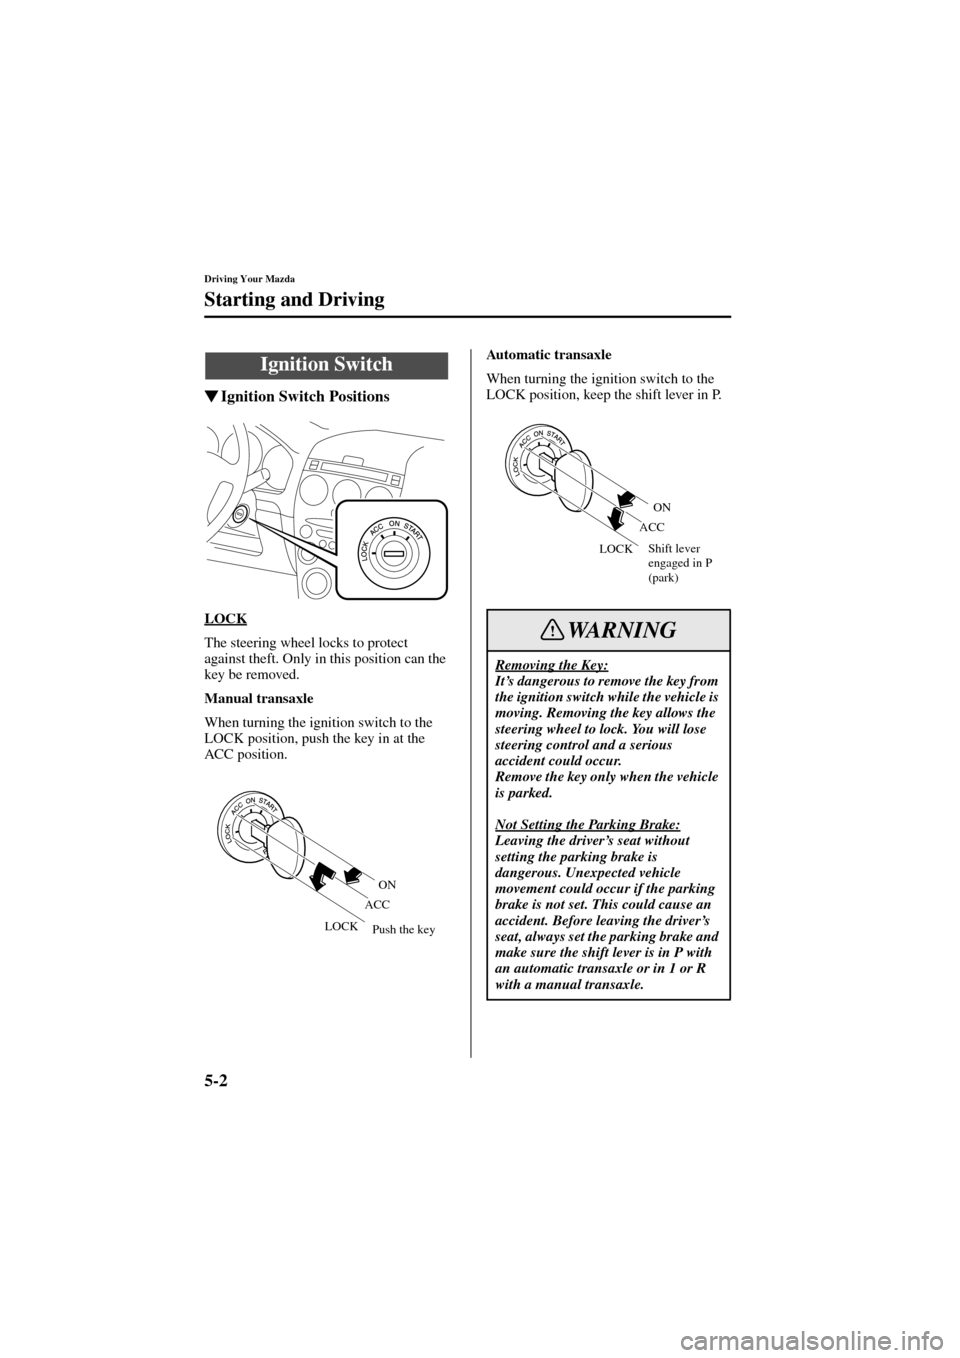 MAZDA MODEL 6 2004  Owners Manual (in English) 5-2
Driving Your Mazda
Form No. 8R29-EA-02I
Starting and Driving
Ignition Switch Positions
LOCK
The steering wheel locks to protect 
against theft. Only in this position can the 
key be removed.
Manu